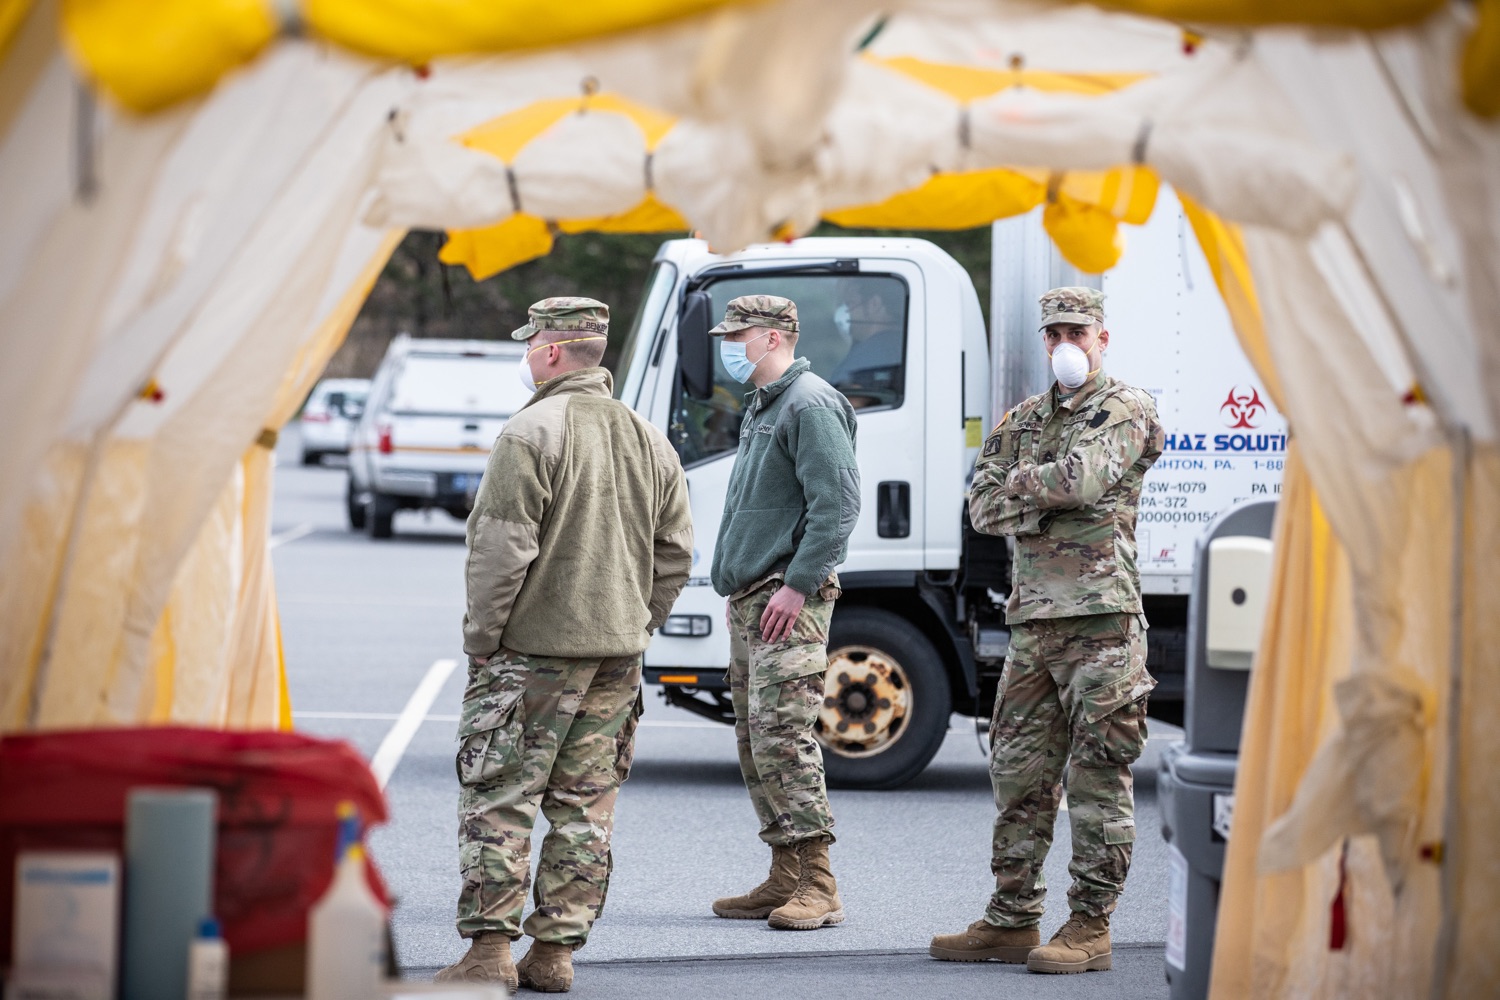 Pennsylvania National Guard soldiers and other emergency responders preparing for testing subjects to arrive at the test location.  The Wolf Administration provided pictures of the COVID-19 testing site at Mohegan Sun Arena at Casey Plaza in Wilkes-Barre, Luzerne County, that will provide much-needed testing for symptomatic first responders, health care workers and residents 65 or older throughout Northeastern Pennsylvania.  Monday, April 20, 2020 - Wilkes-Barre, Luzerne County<br><a href="https://filesource.amperwave.net/commonwealthofpa/photo/17965_doh_Testing_Site_dz_dz_0012.jpg" target="_blank">⇣ Download Photo</a>